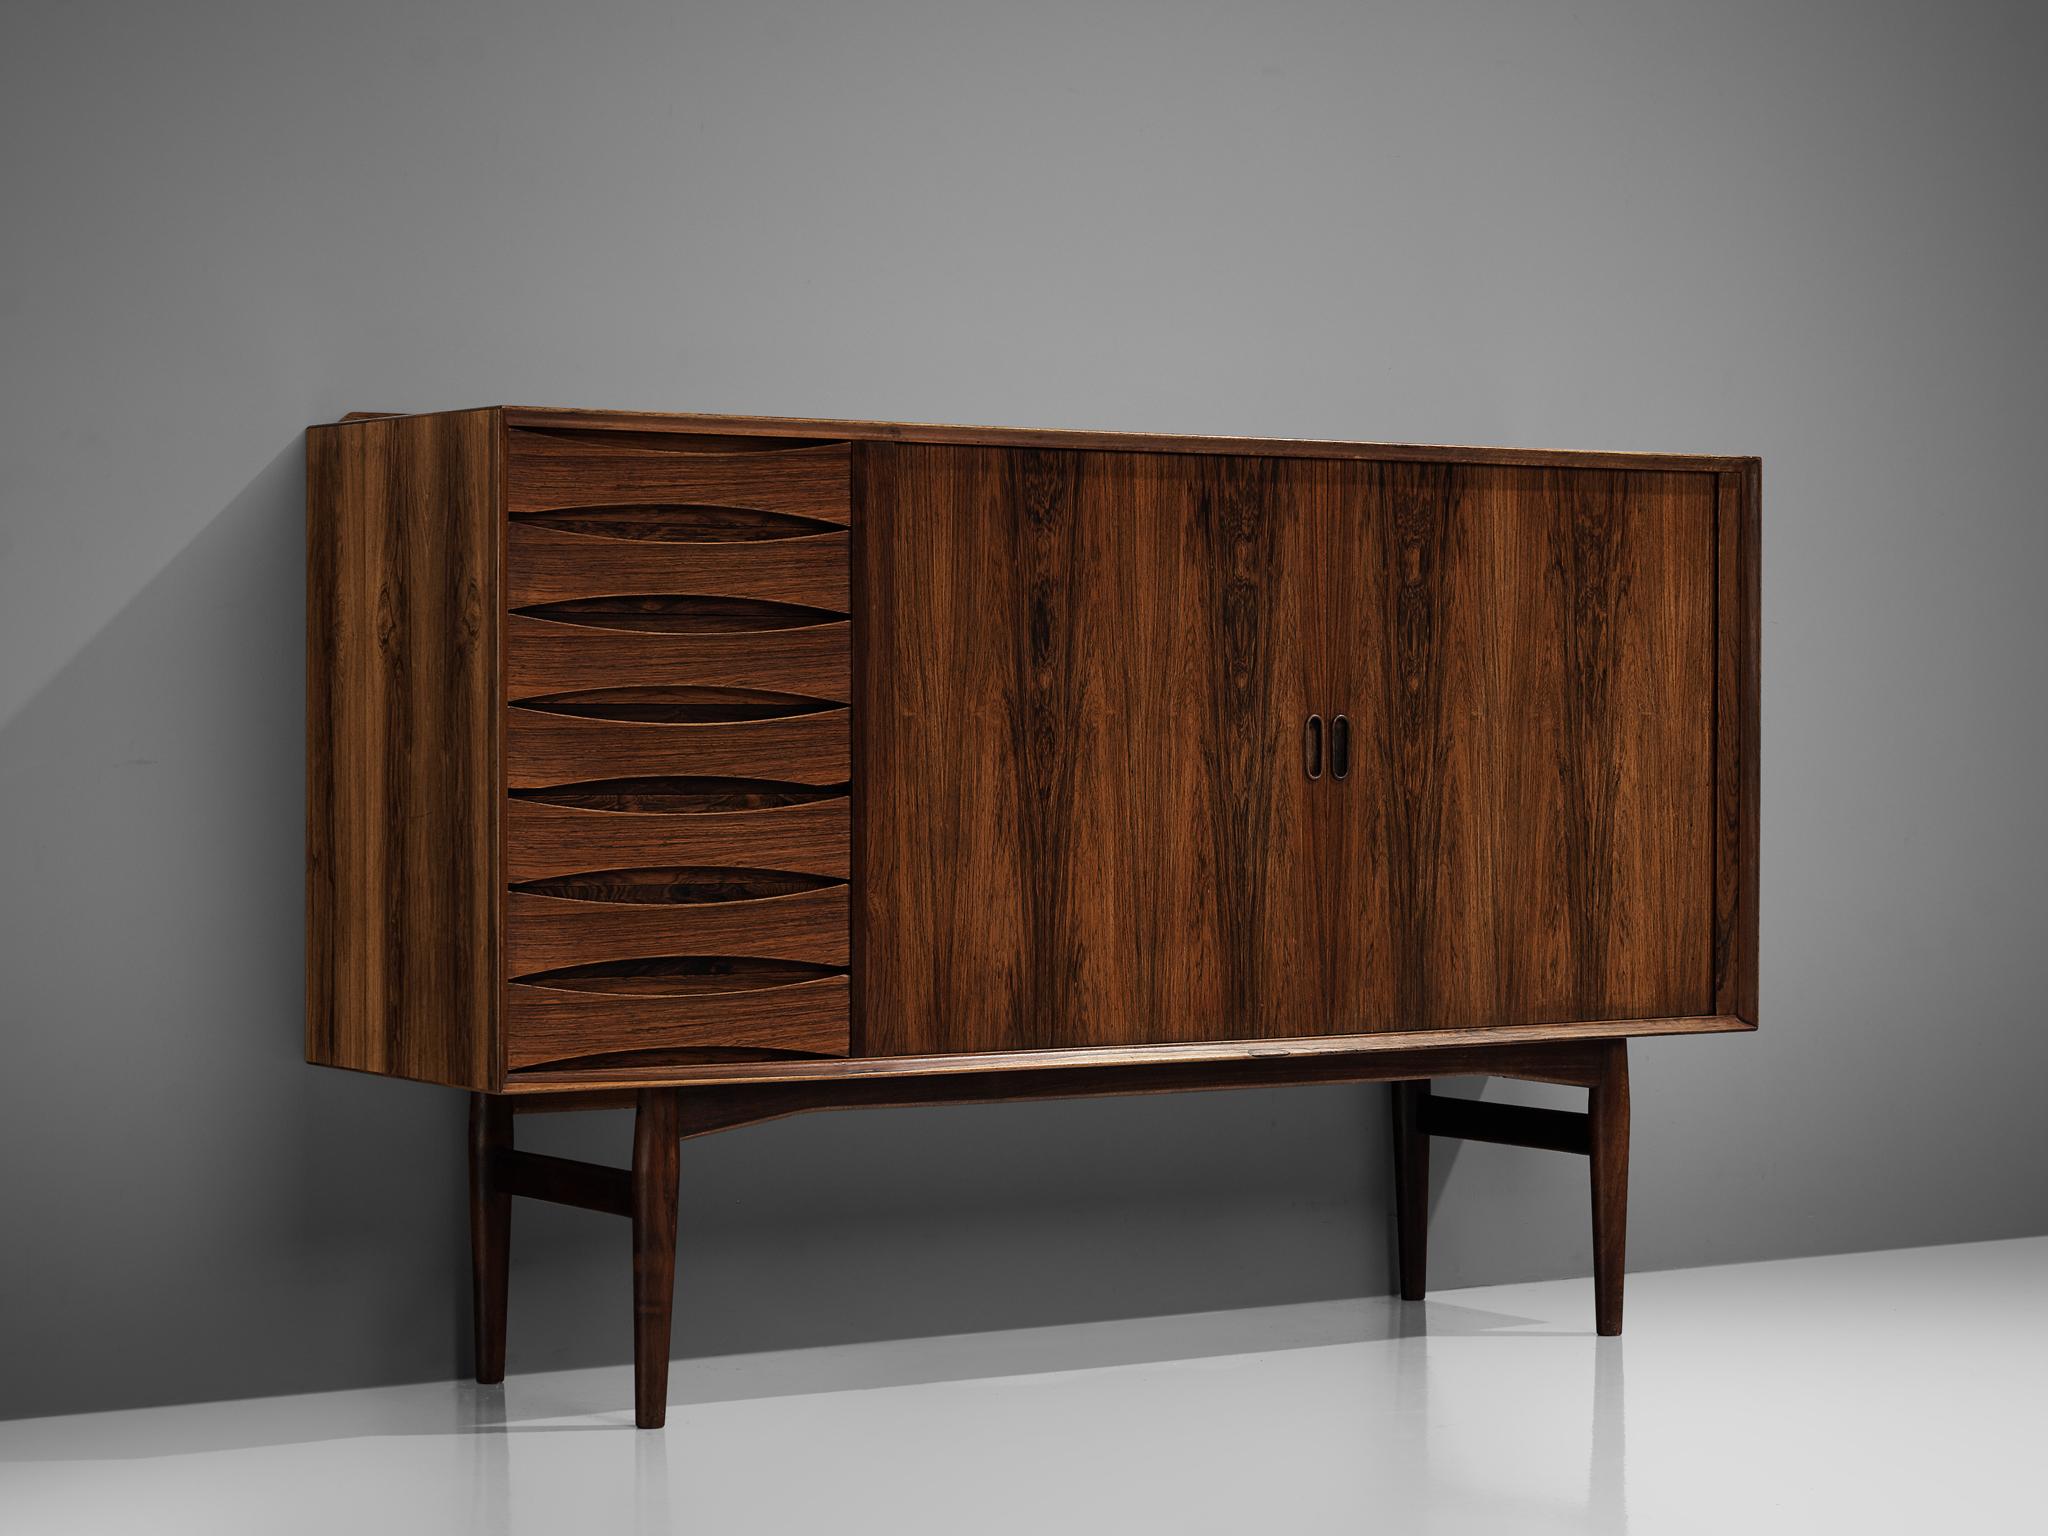 Arne Vodder for Sibast furniture, cabinet, rosewood, Denmark, 1960s.

This small rosewood sideboard is designed by Arne Vodder and is an iconic example of Danish midcentury furniture both in finish, aesthetics and use of material. The main